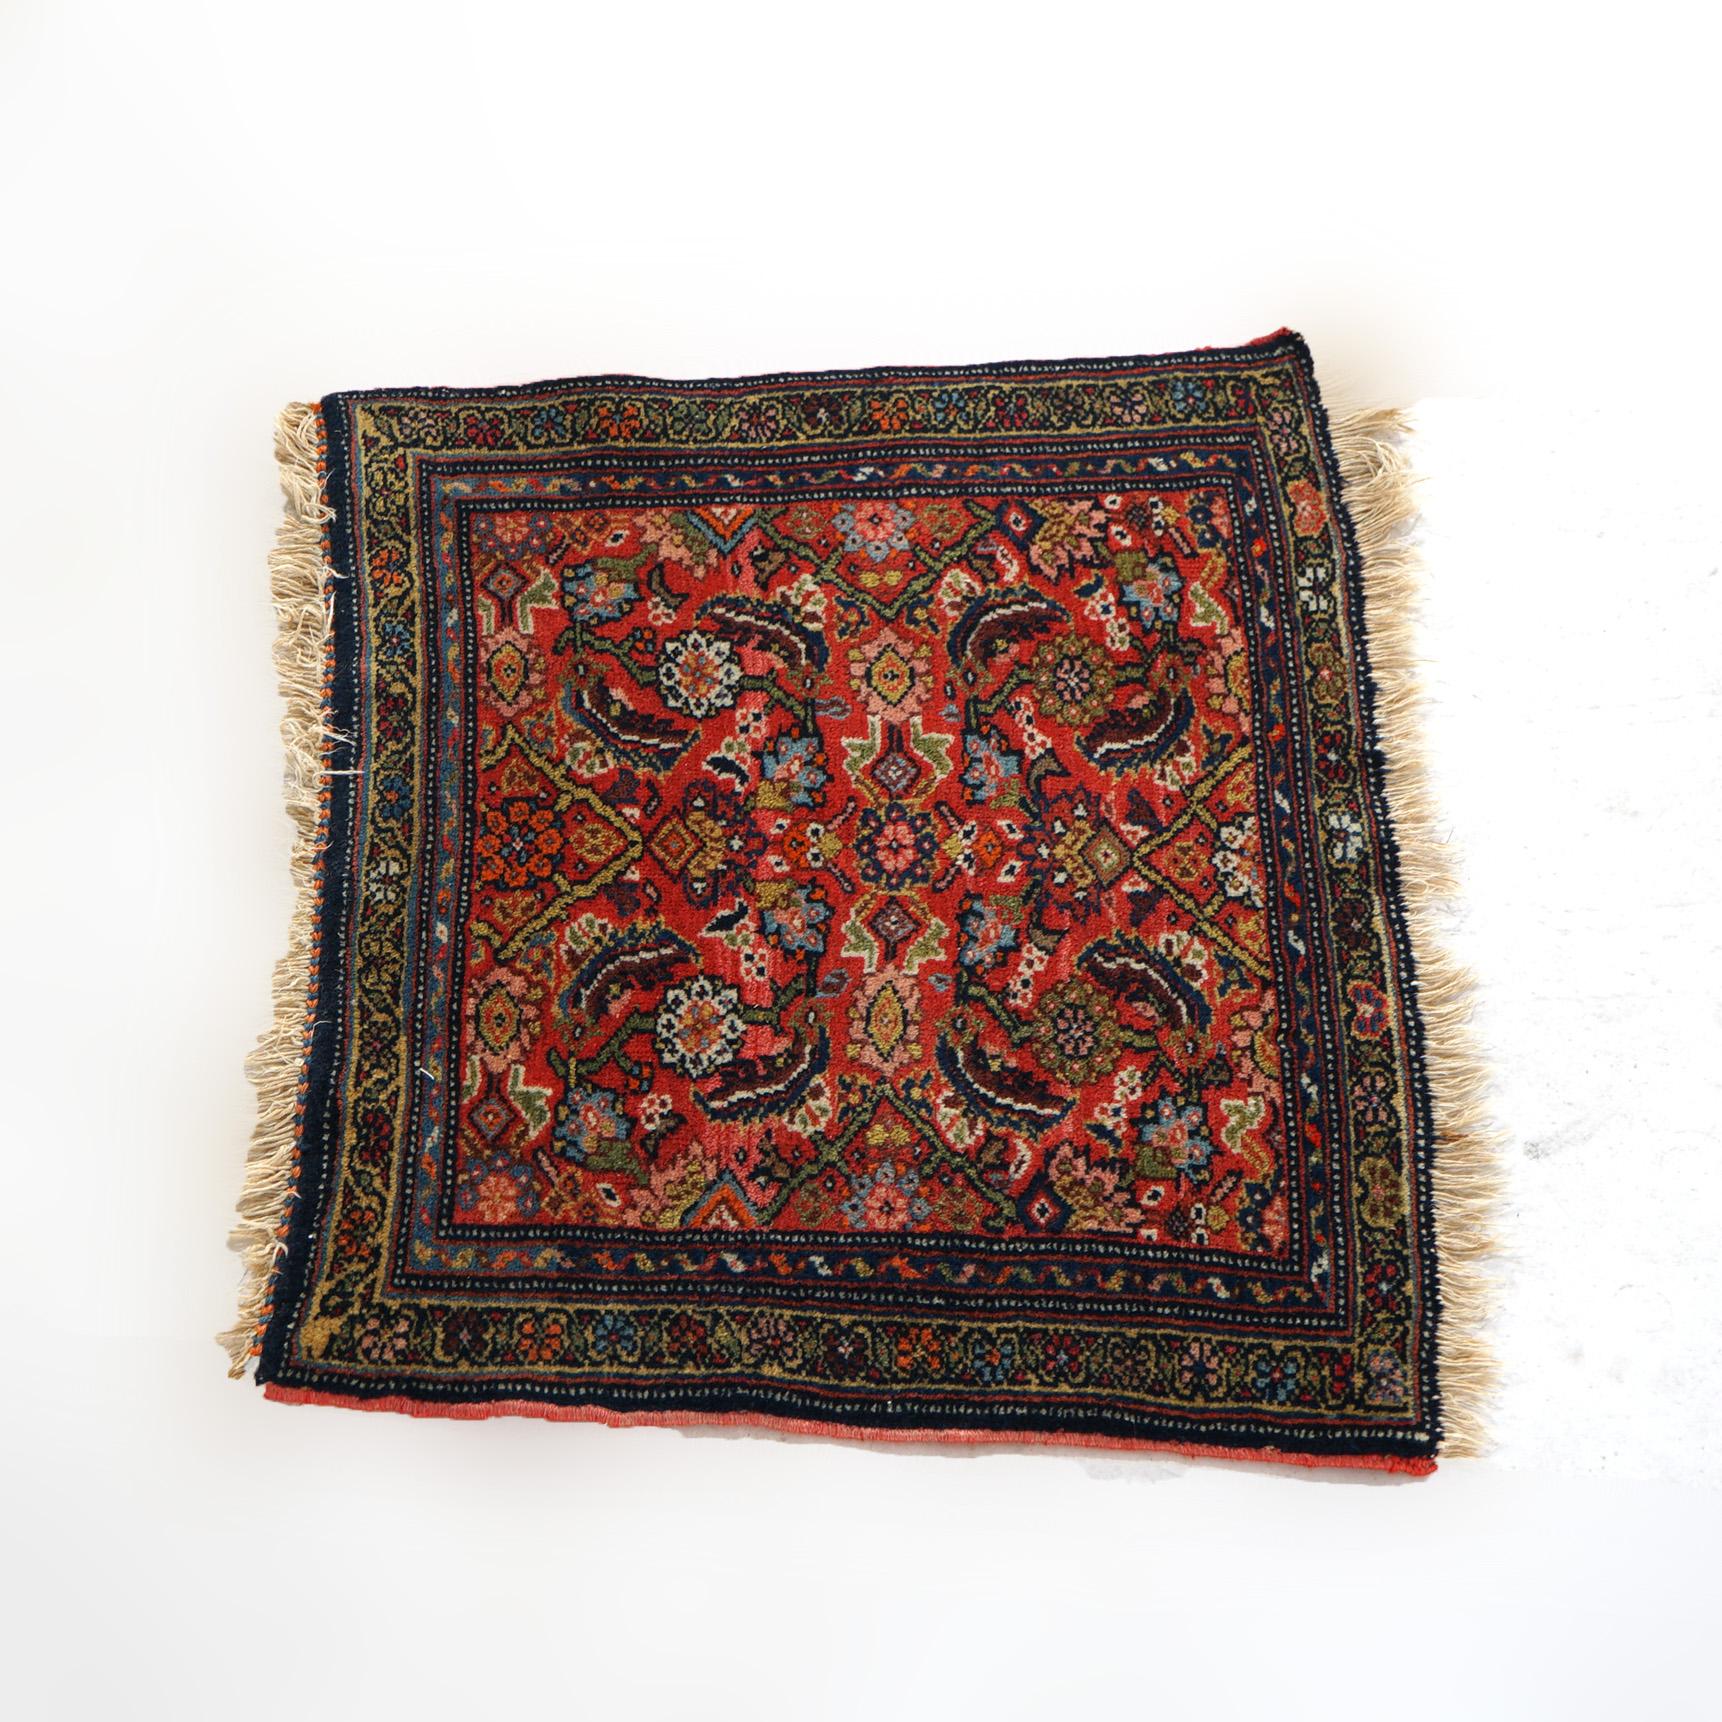 An antique oriental rug offers wool construction with Herati design, circa. 1920

Measures - 27.5